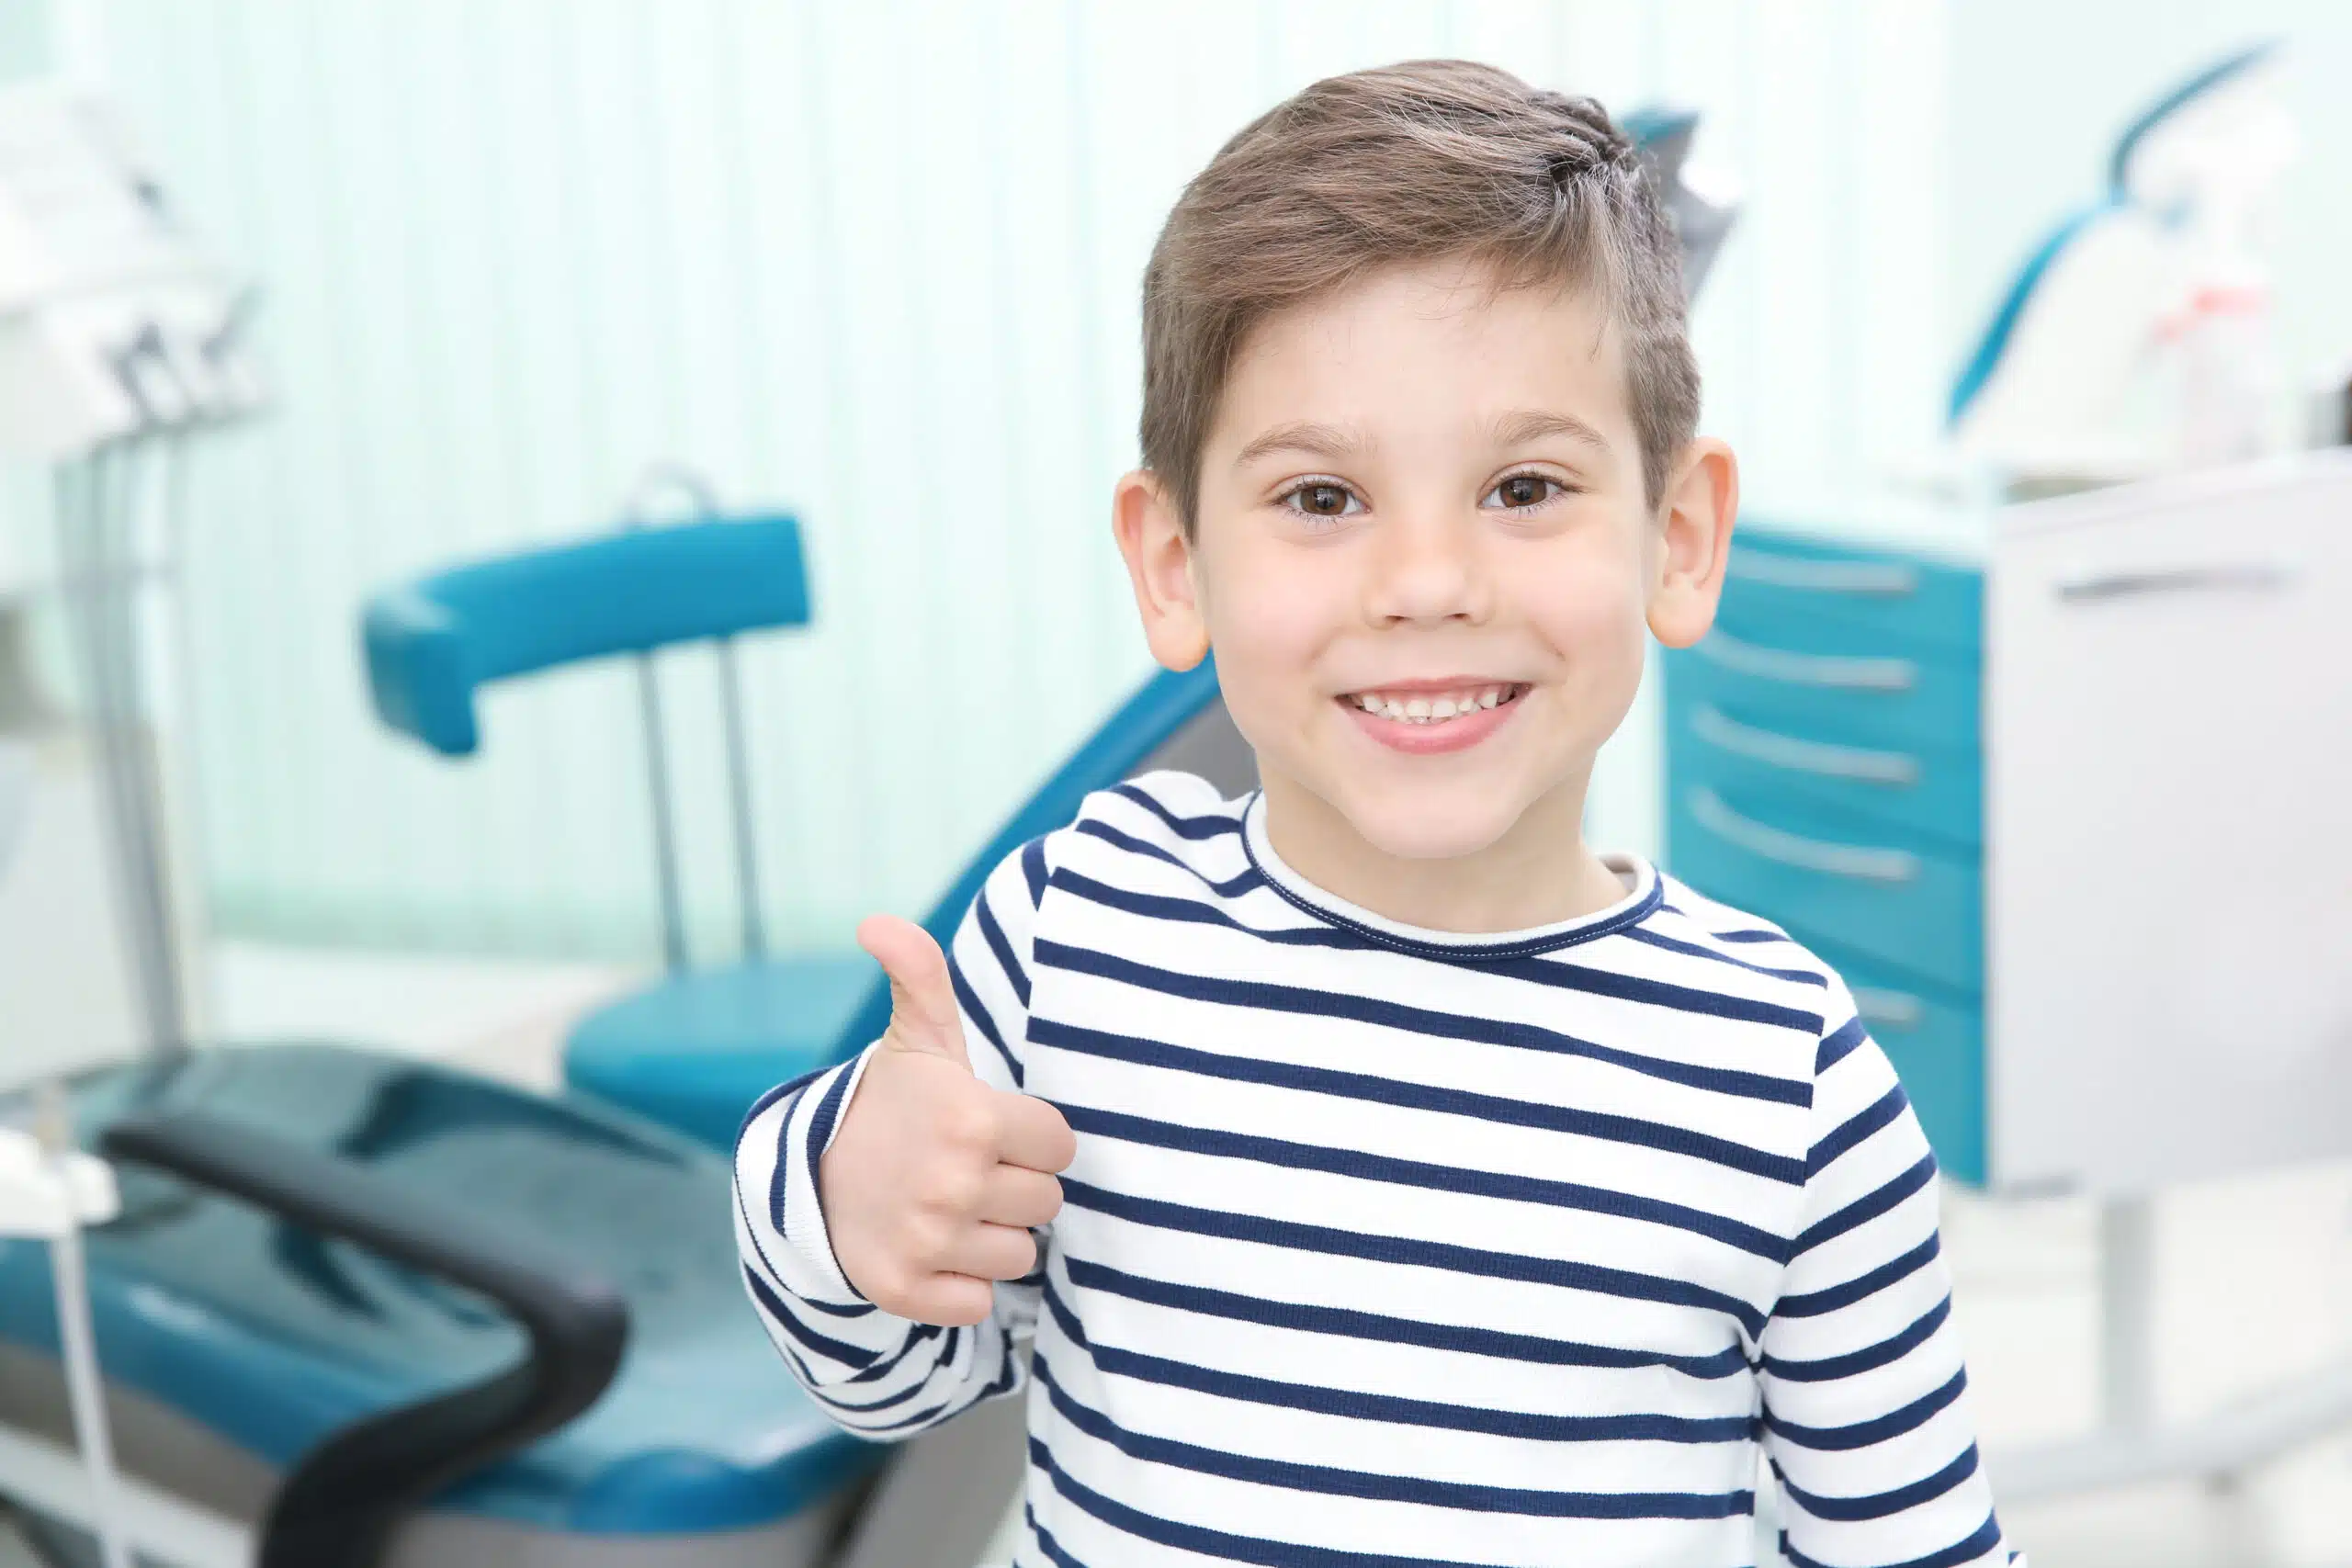 Our team is experienced in providing gentle and compassionate care for children who have experienced dental trauma, including tooth fractures and avulsions.